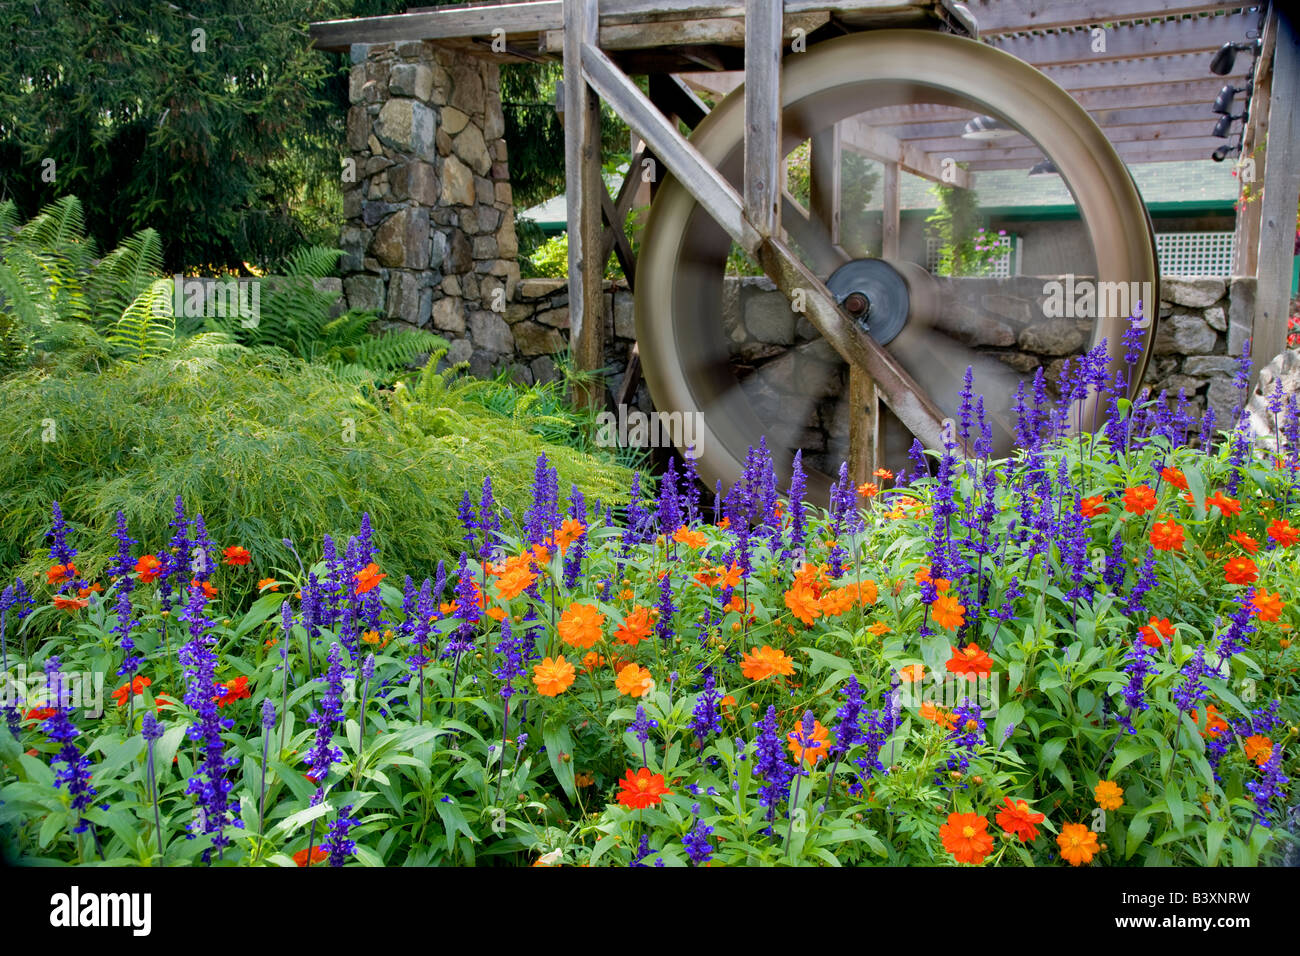 Water wheel and flowers at Butchart Gardens B C Canada Stock Photo